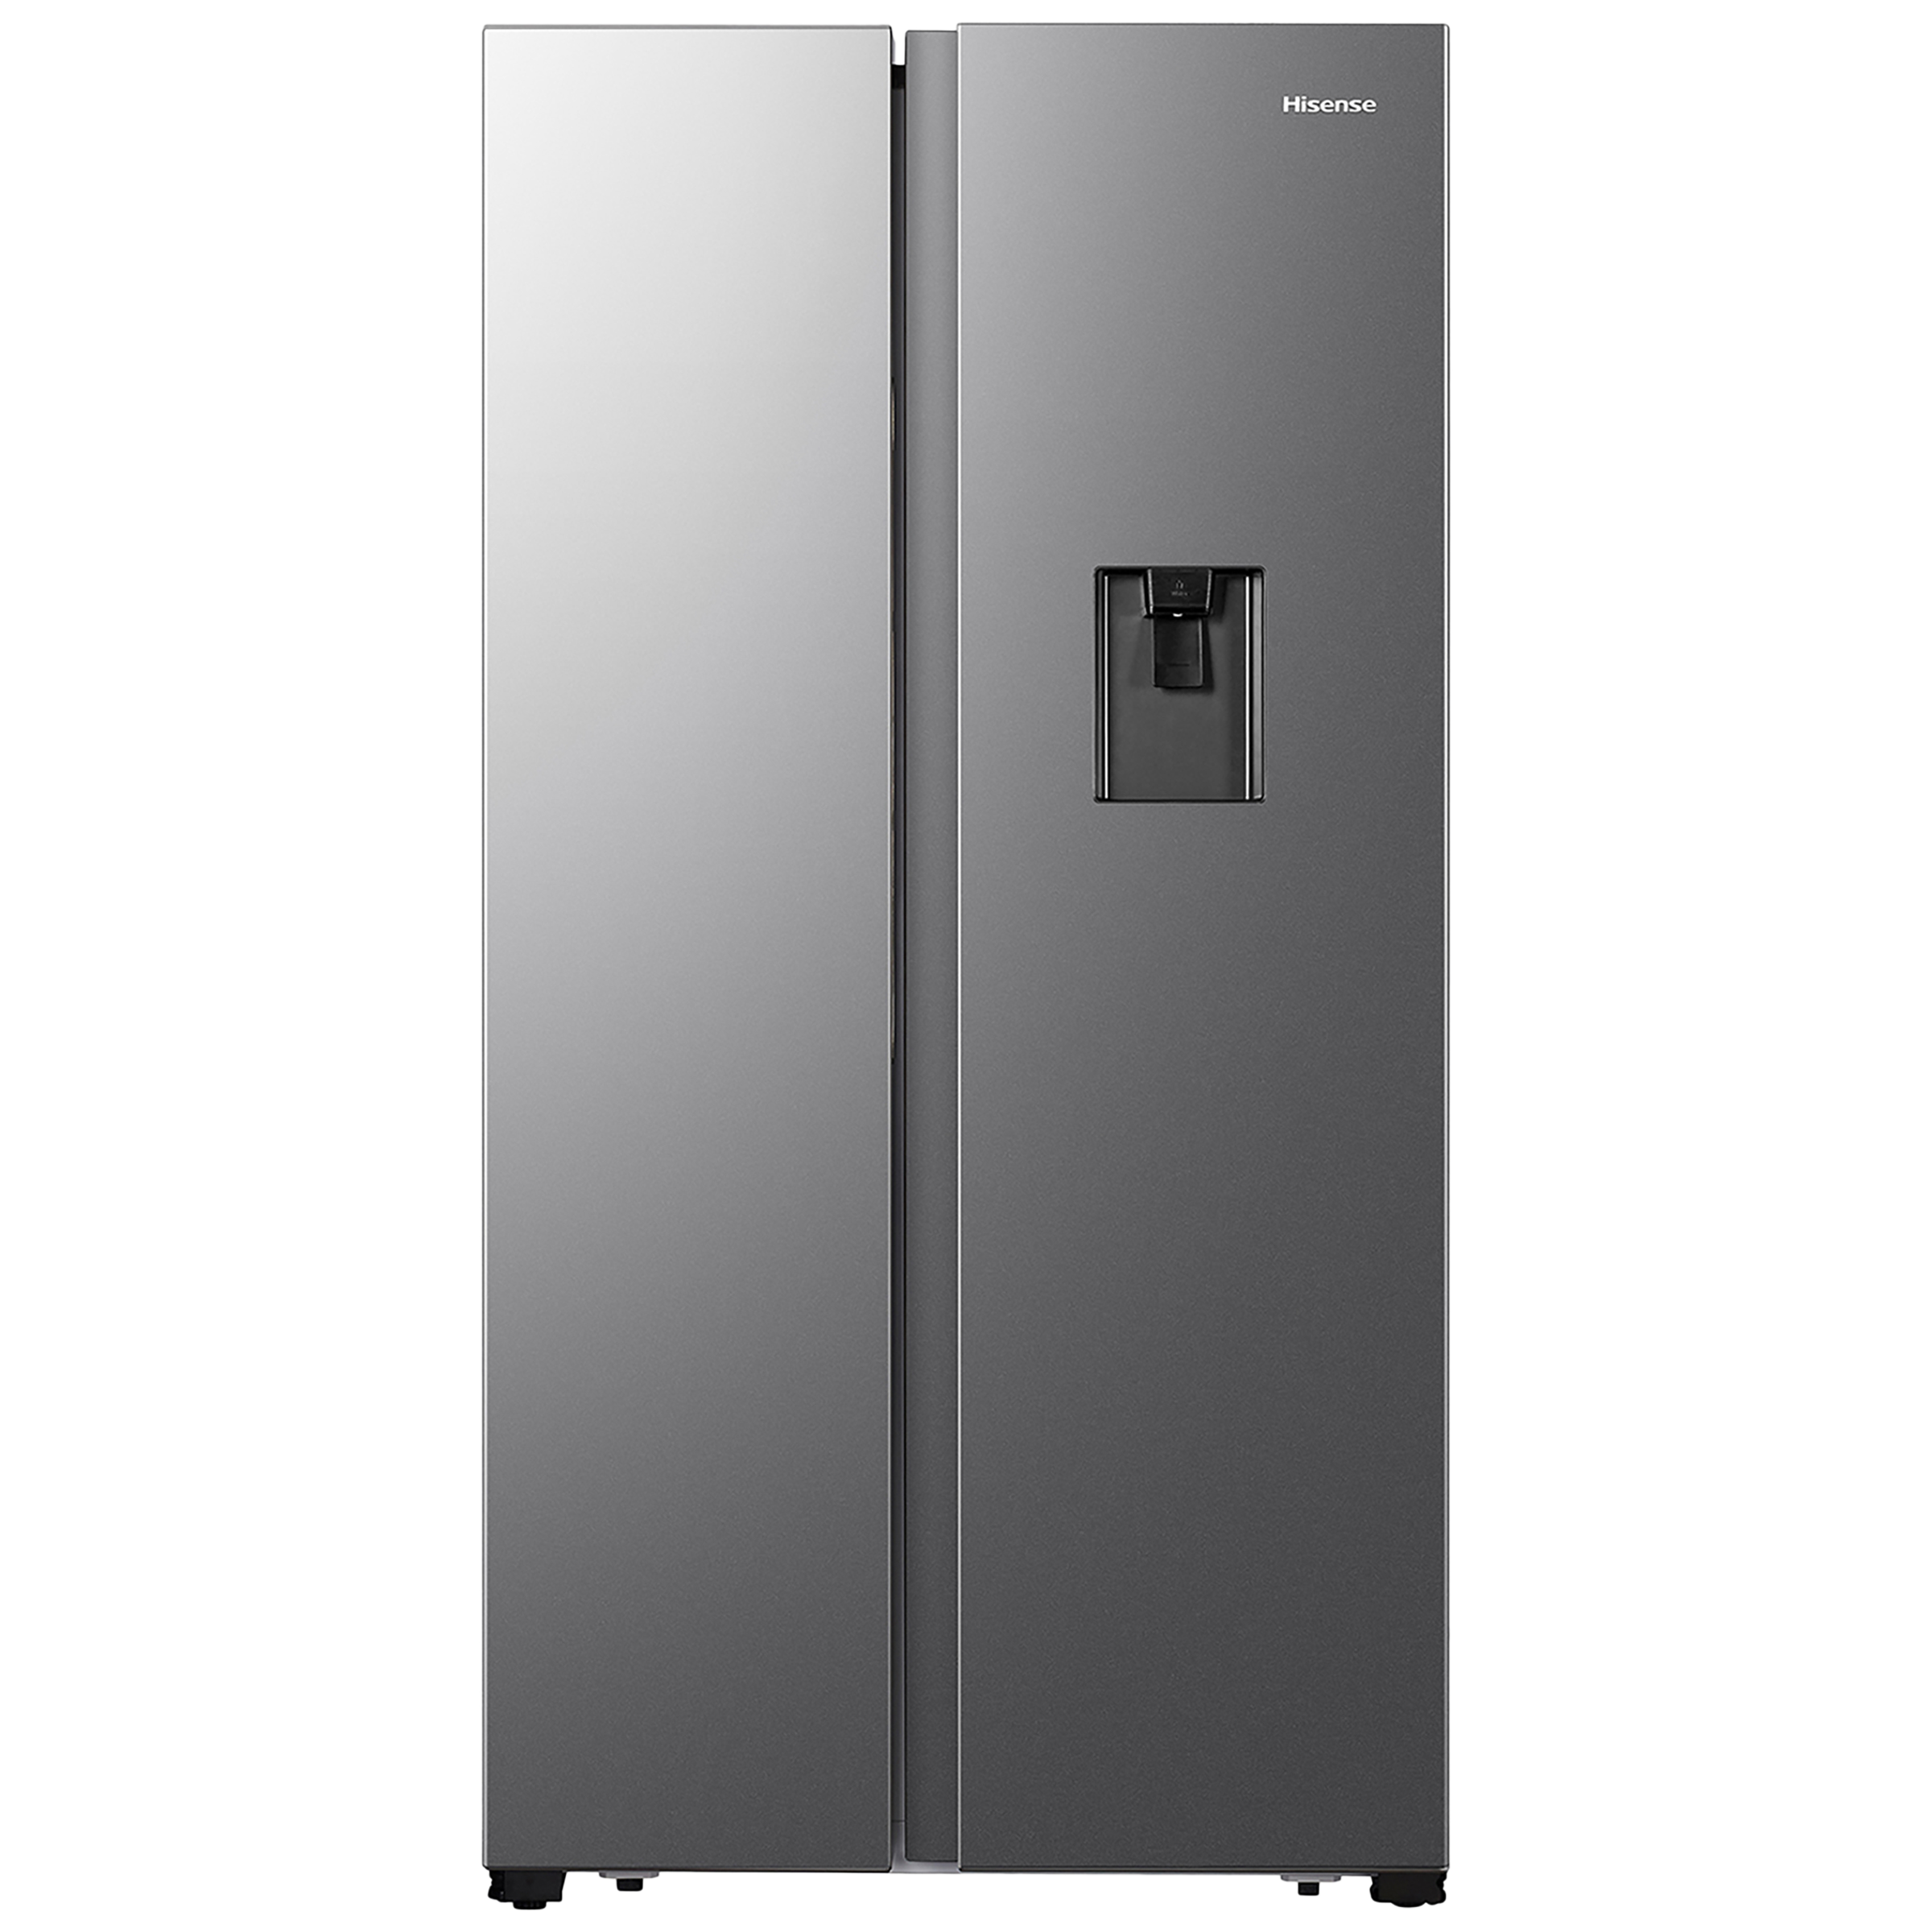 Hisense 564 Litres Frost Free Inverter Side-by-Side Door Refrigerator (Stabilizer Free Operation, RS564N4SSNW, Silver)